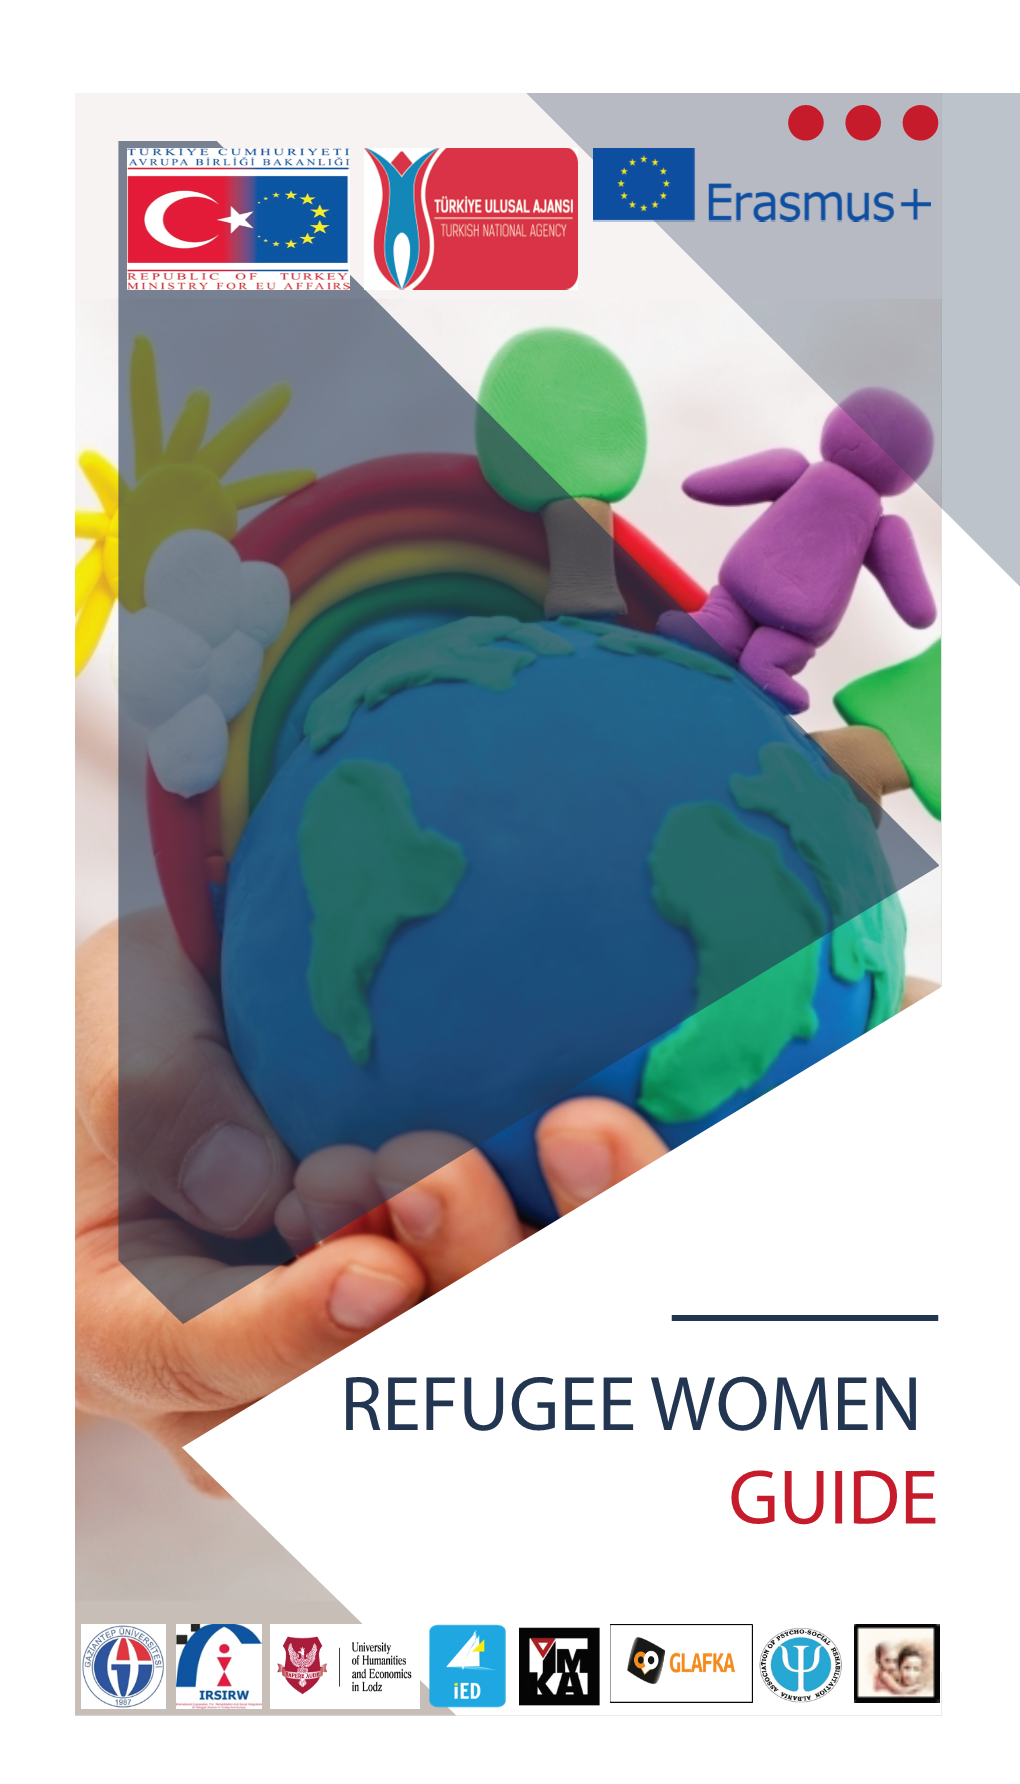 REFUGEE WOMEN GUIDE This Booklet Was Created As Part of the Erasmus+ Project